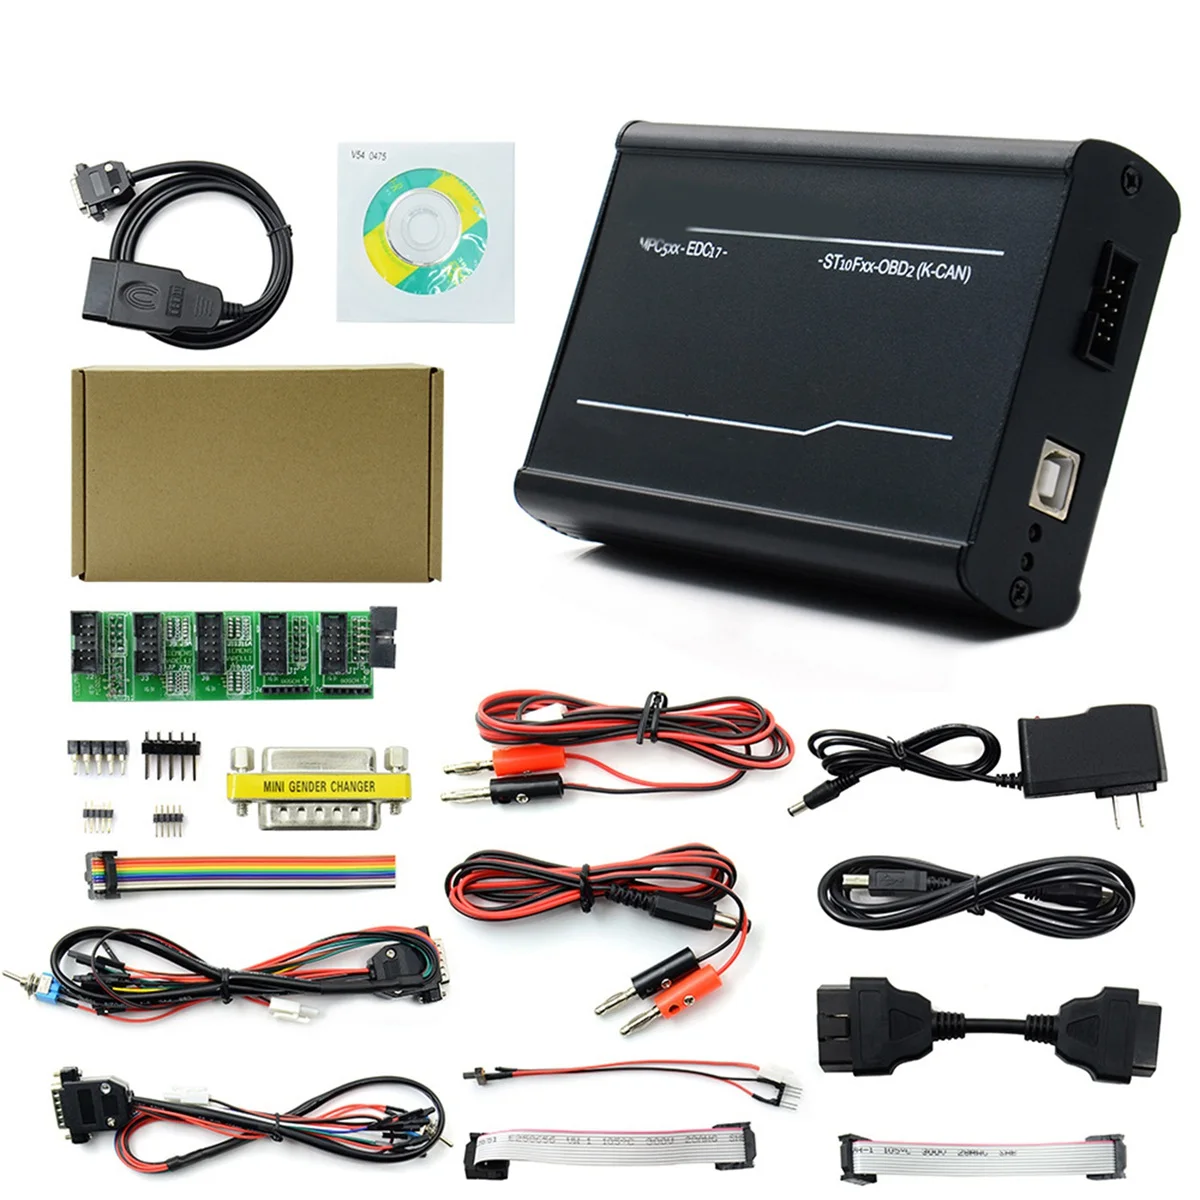 

V54 0475 FGTECH Galletto 4 Master V54 0386 0475 VD300 Support BDM-Tricore-Boot-OBD FG Tech FW0475 ECU Chip Tuning Tool